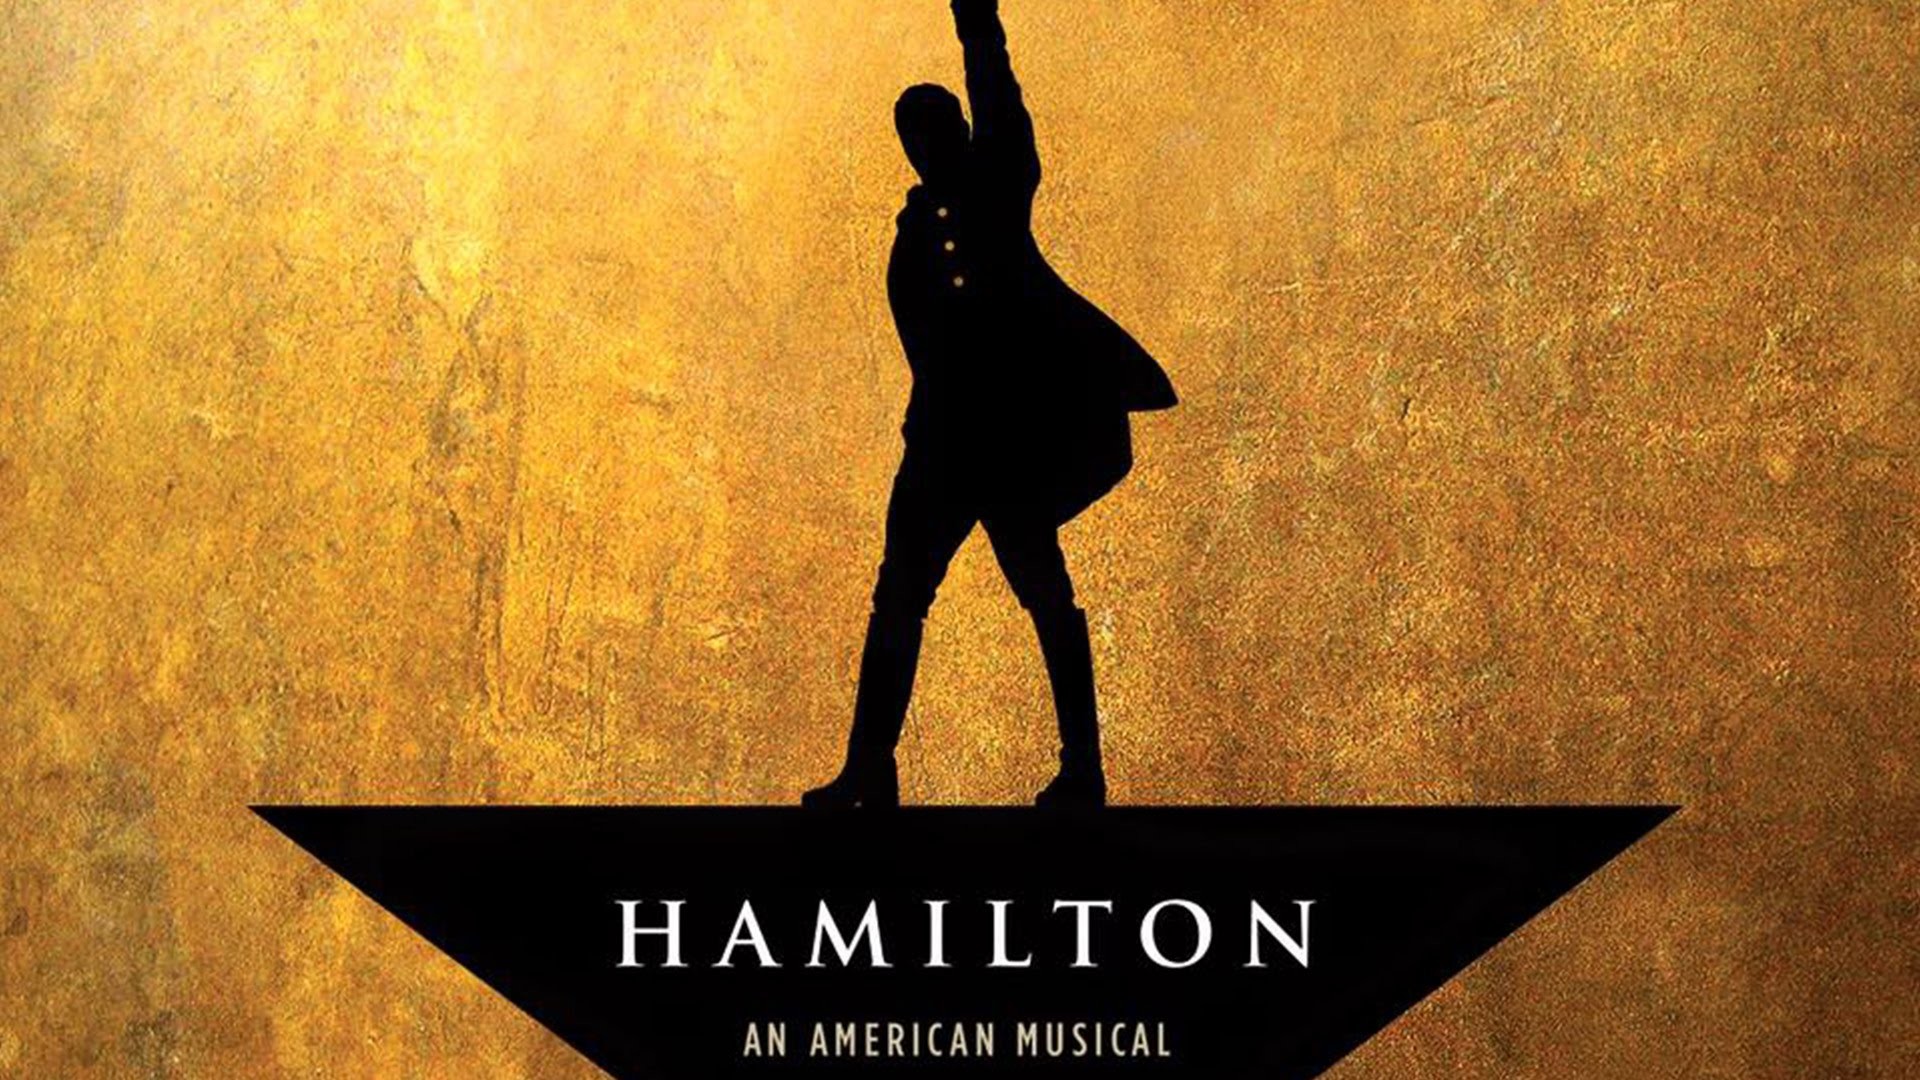 Hamilton the musical, directed by Thomas Kail, is the story about alexander Hamilton. Its about the founding father and first secretary of treasury,